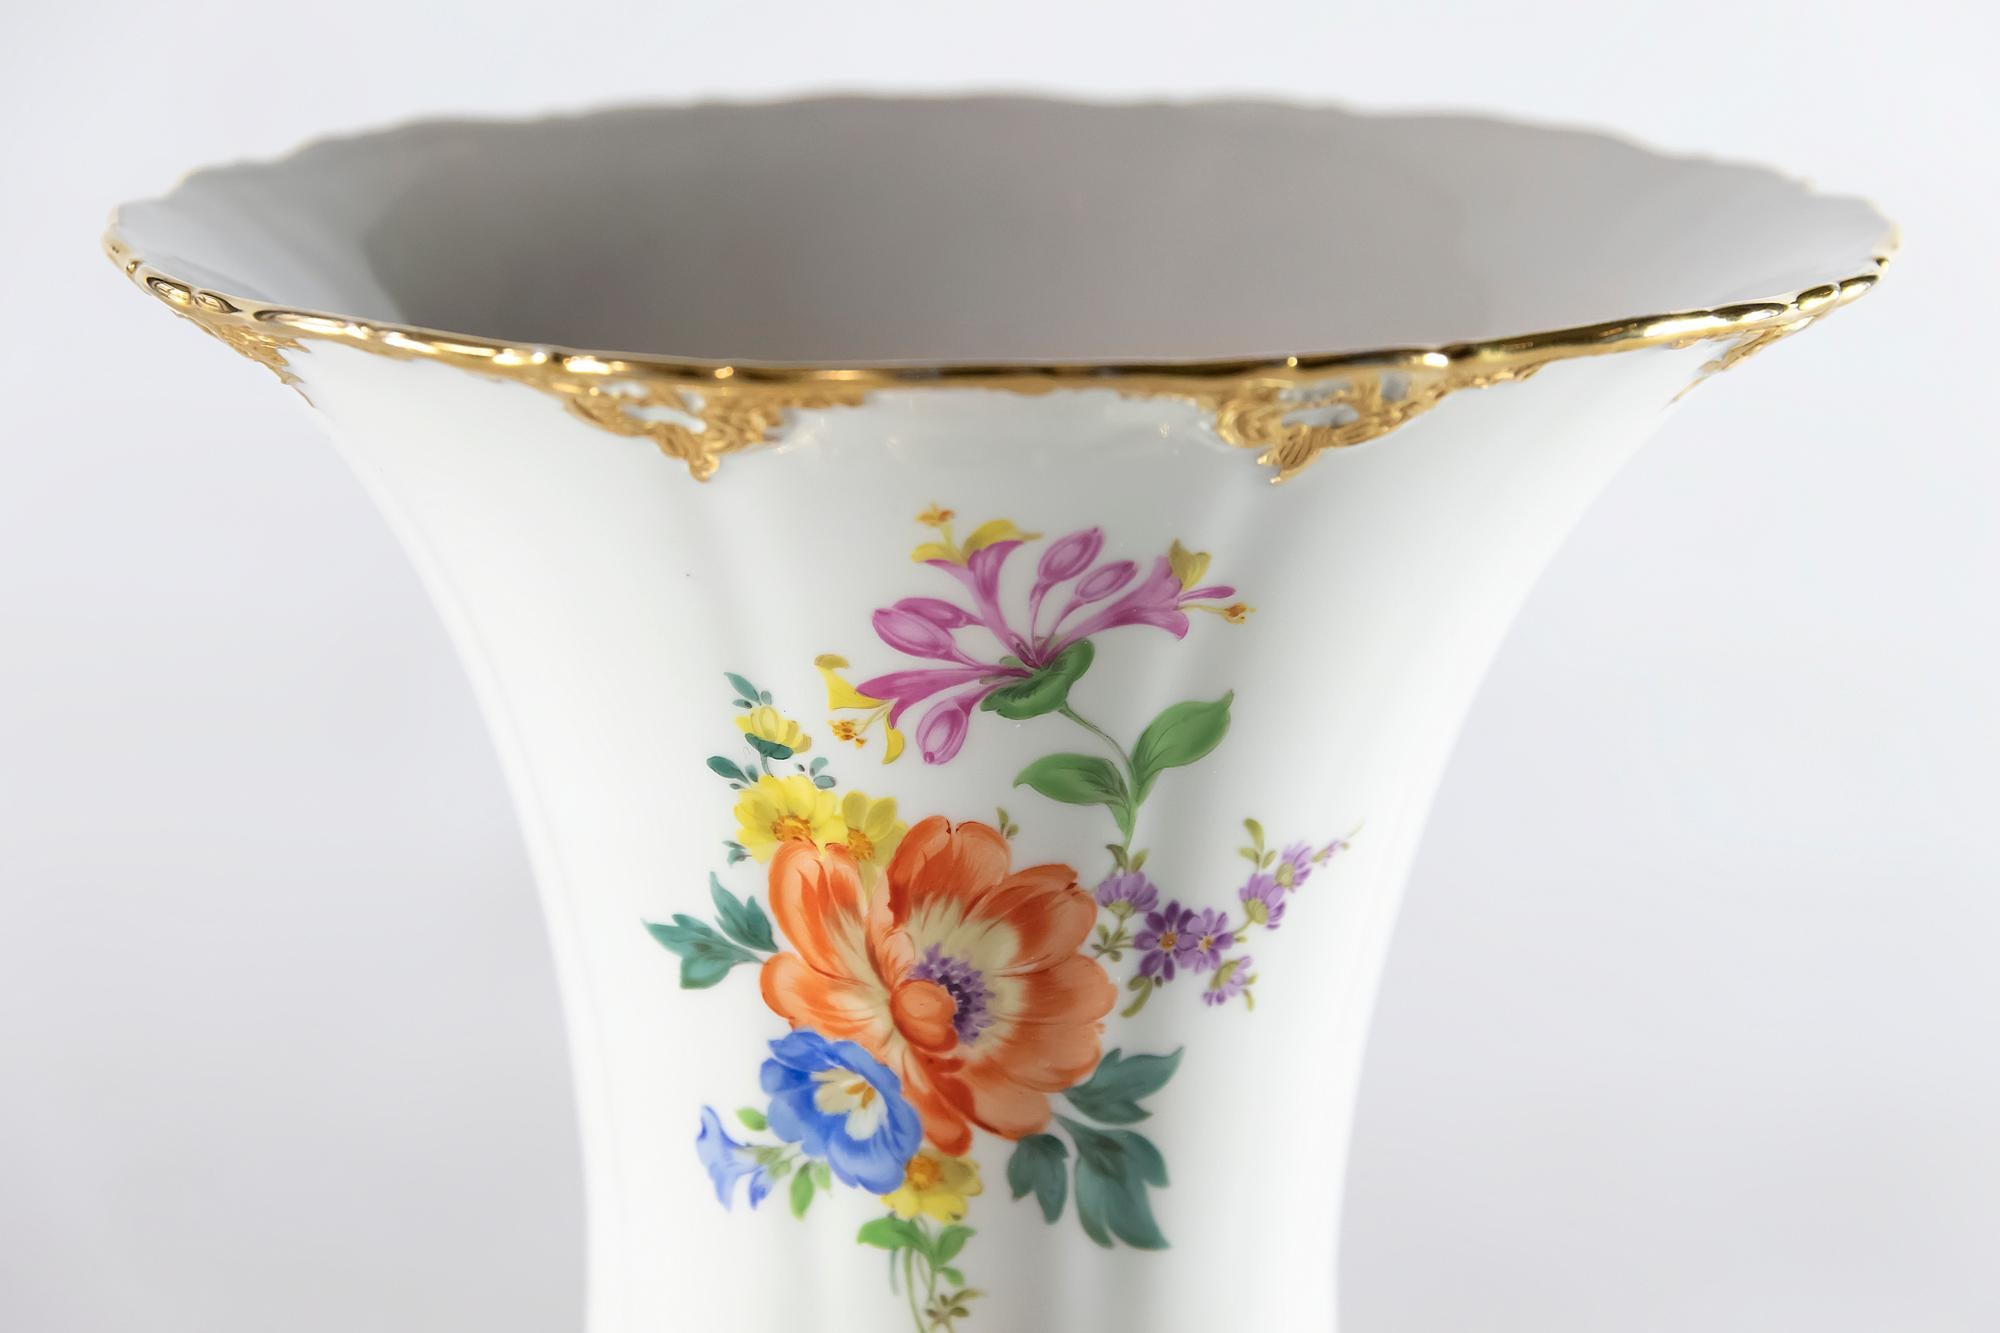 Meissen Porcelain vase with hand painted flowers and decorated gold ornaments.